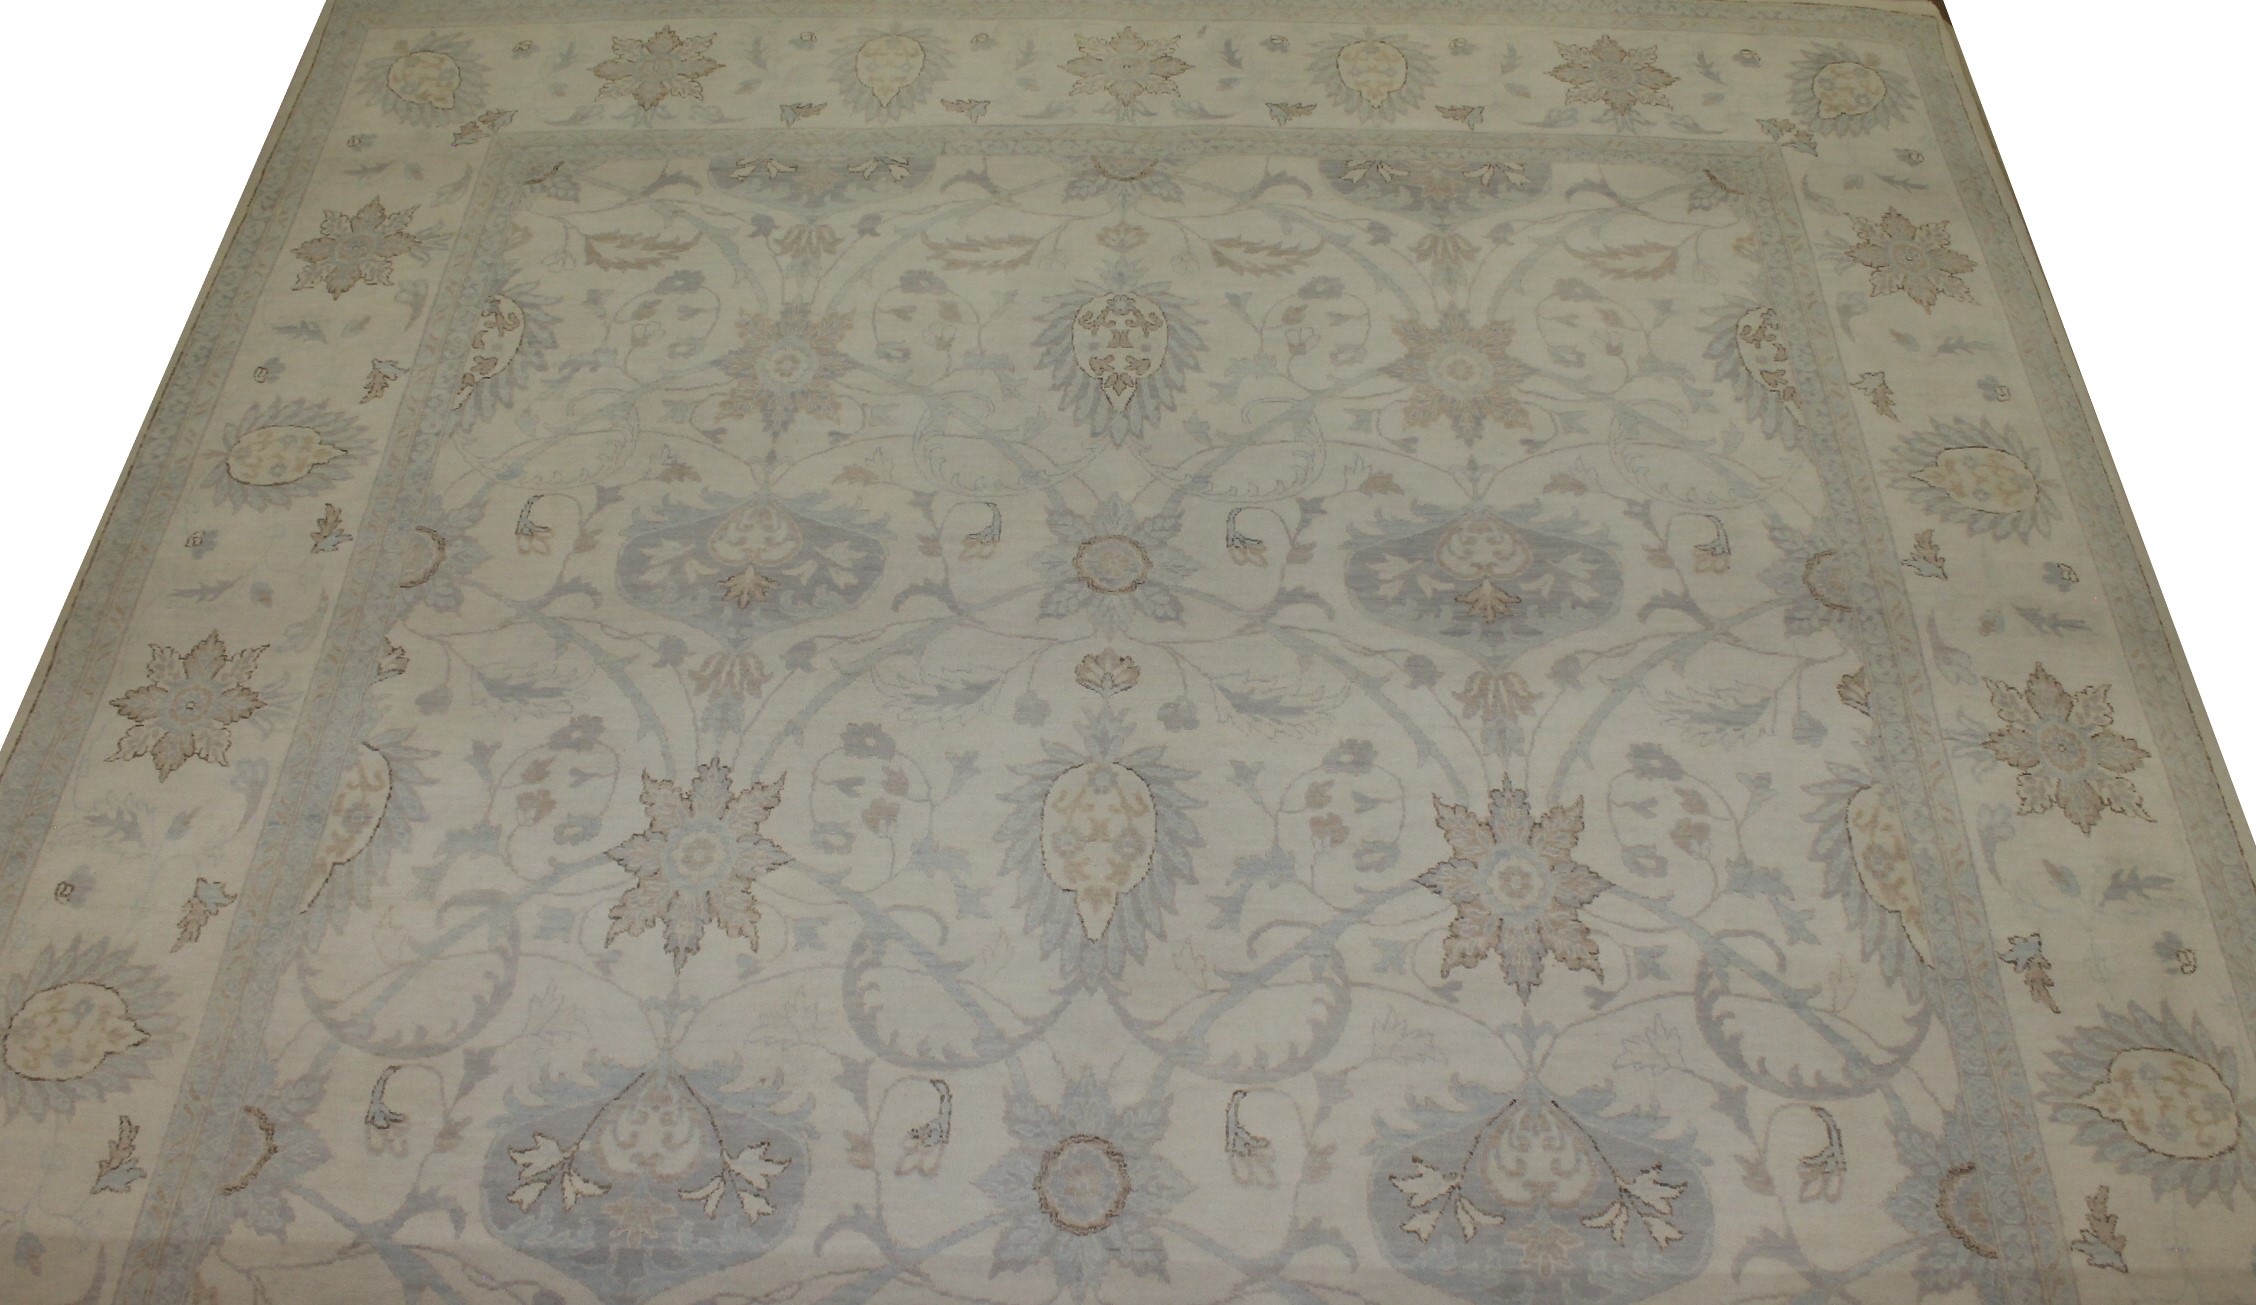 10x14 Antique Revival Hand Knotted Wool Area Rug - MR19114